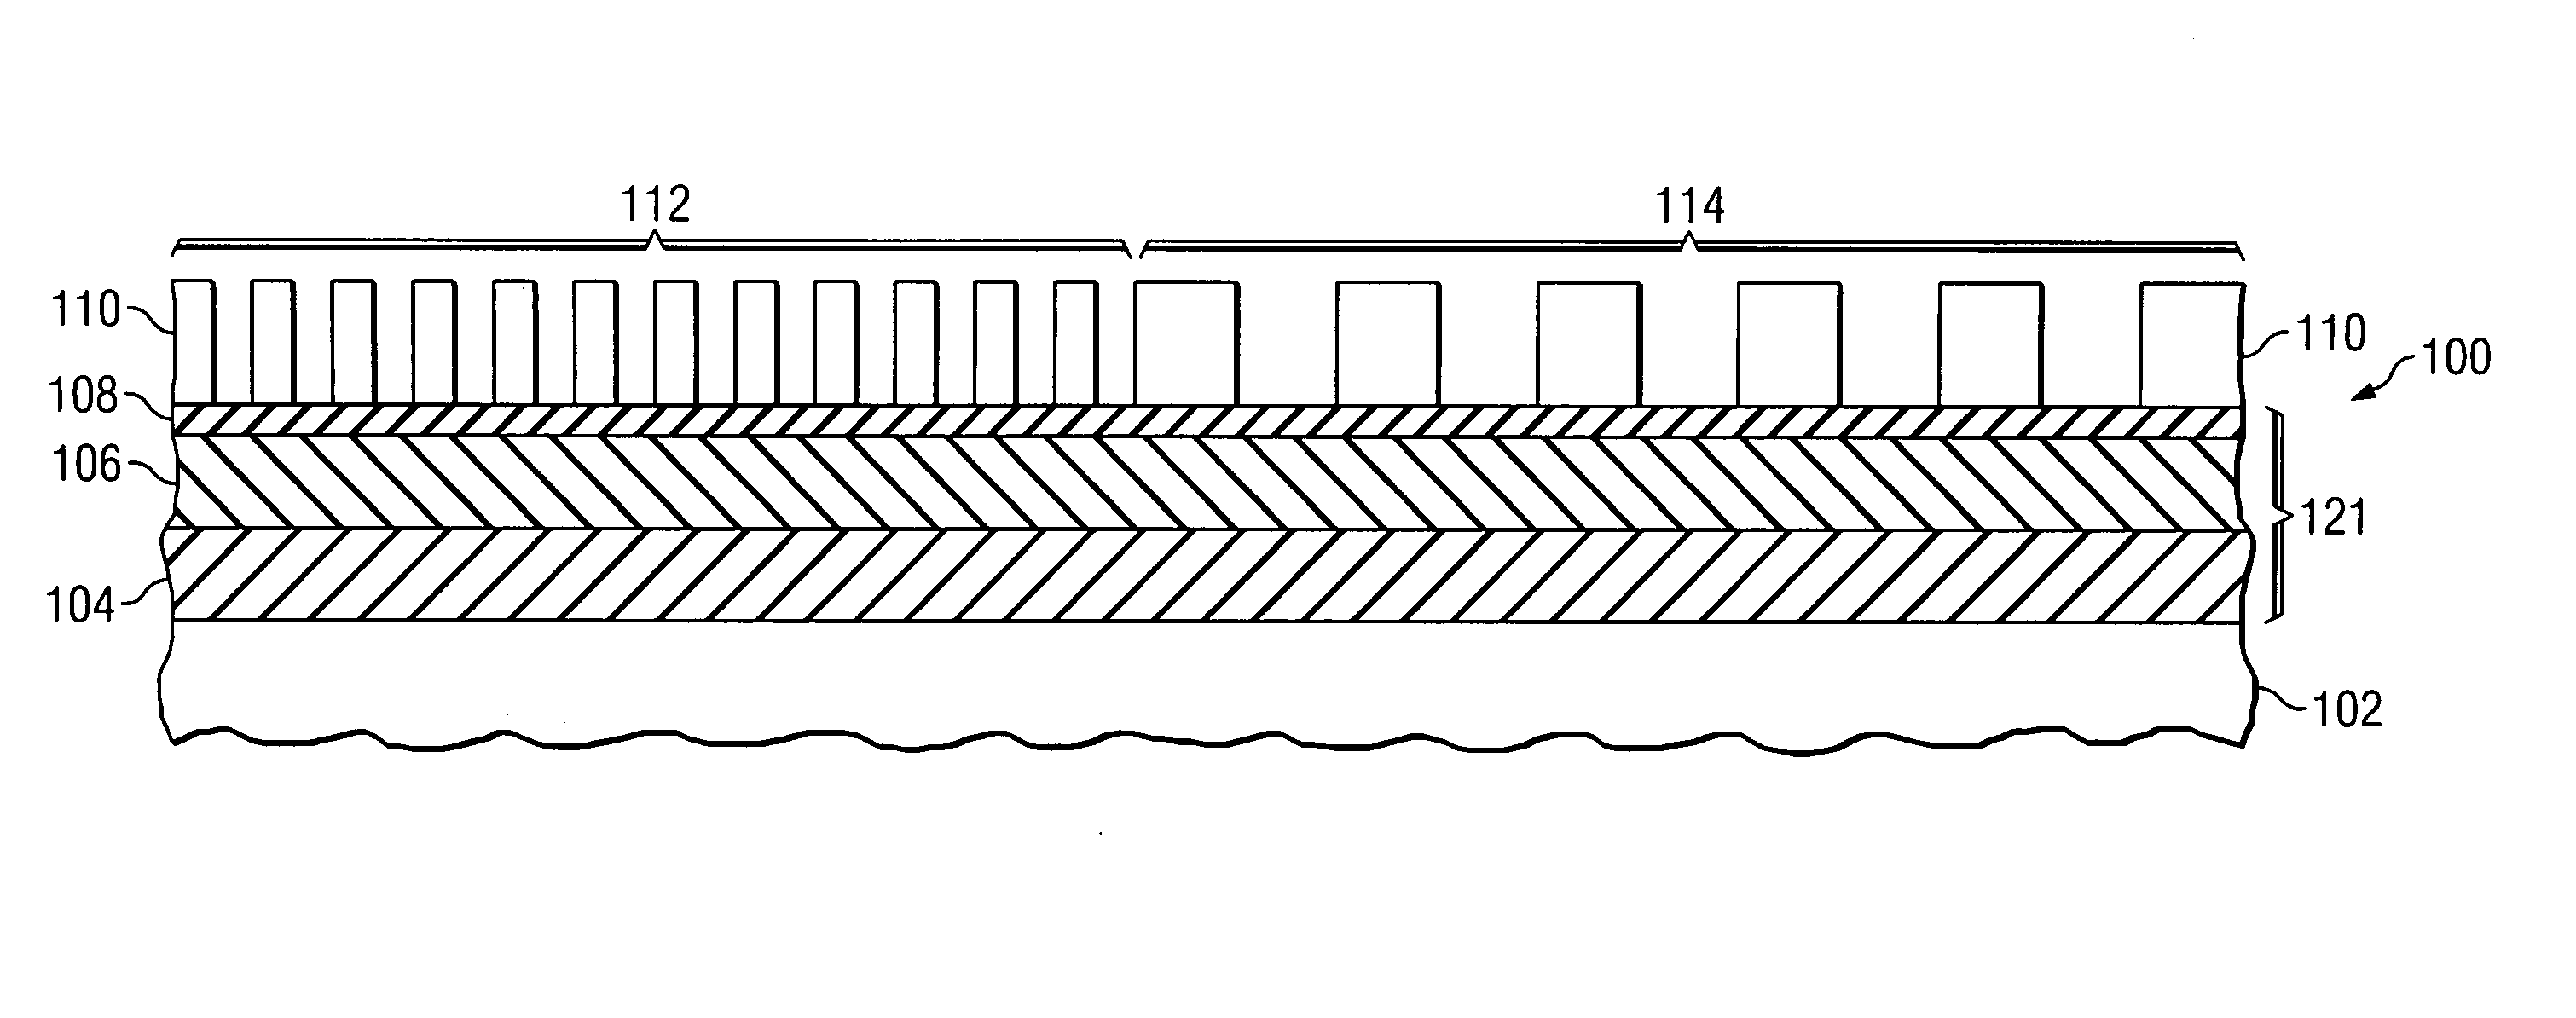 Air gaps between conductive lines for reduced RC delay of integrated circuits